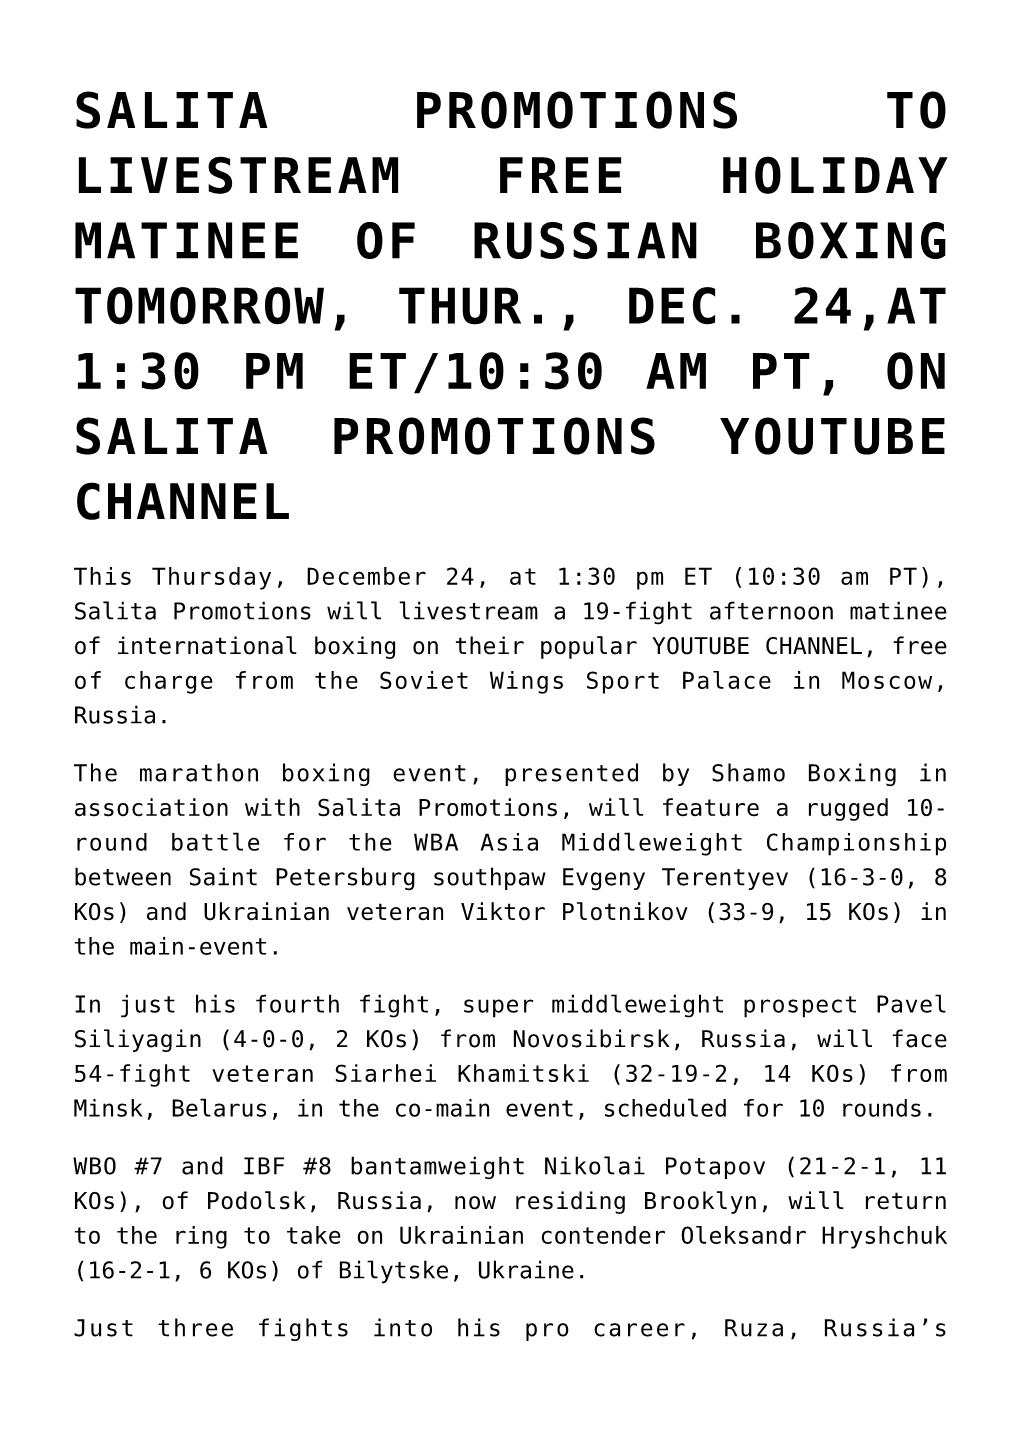 Salita Promotions to Livestream Free Holiday Matinee of Russian Boxing Tomorrow, Thur., Dec